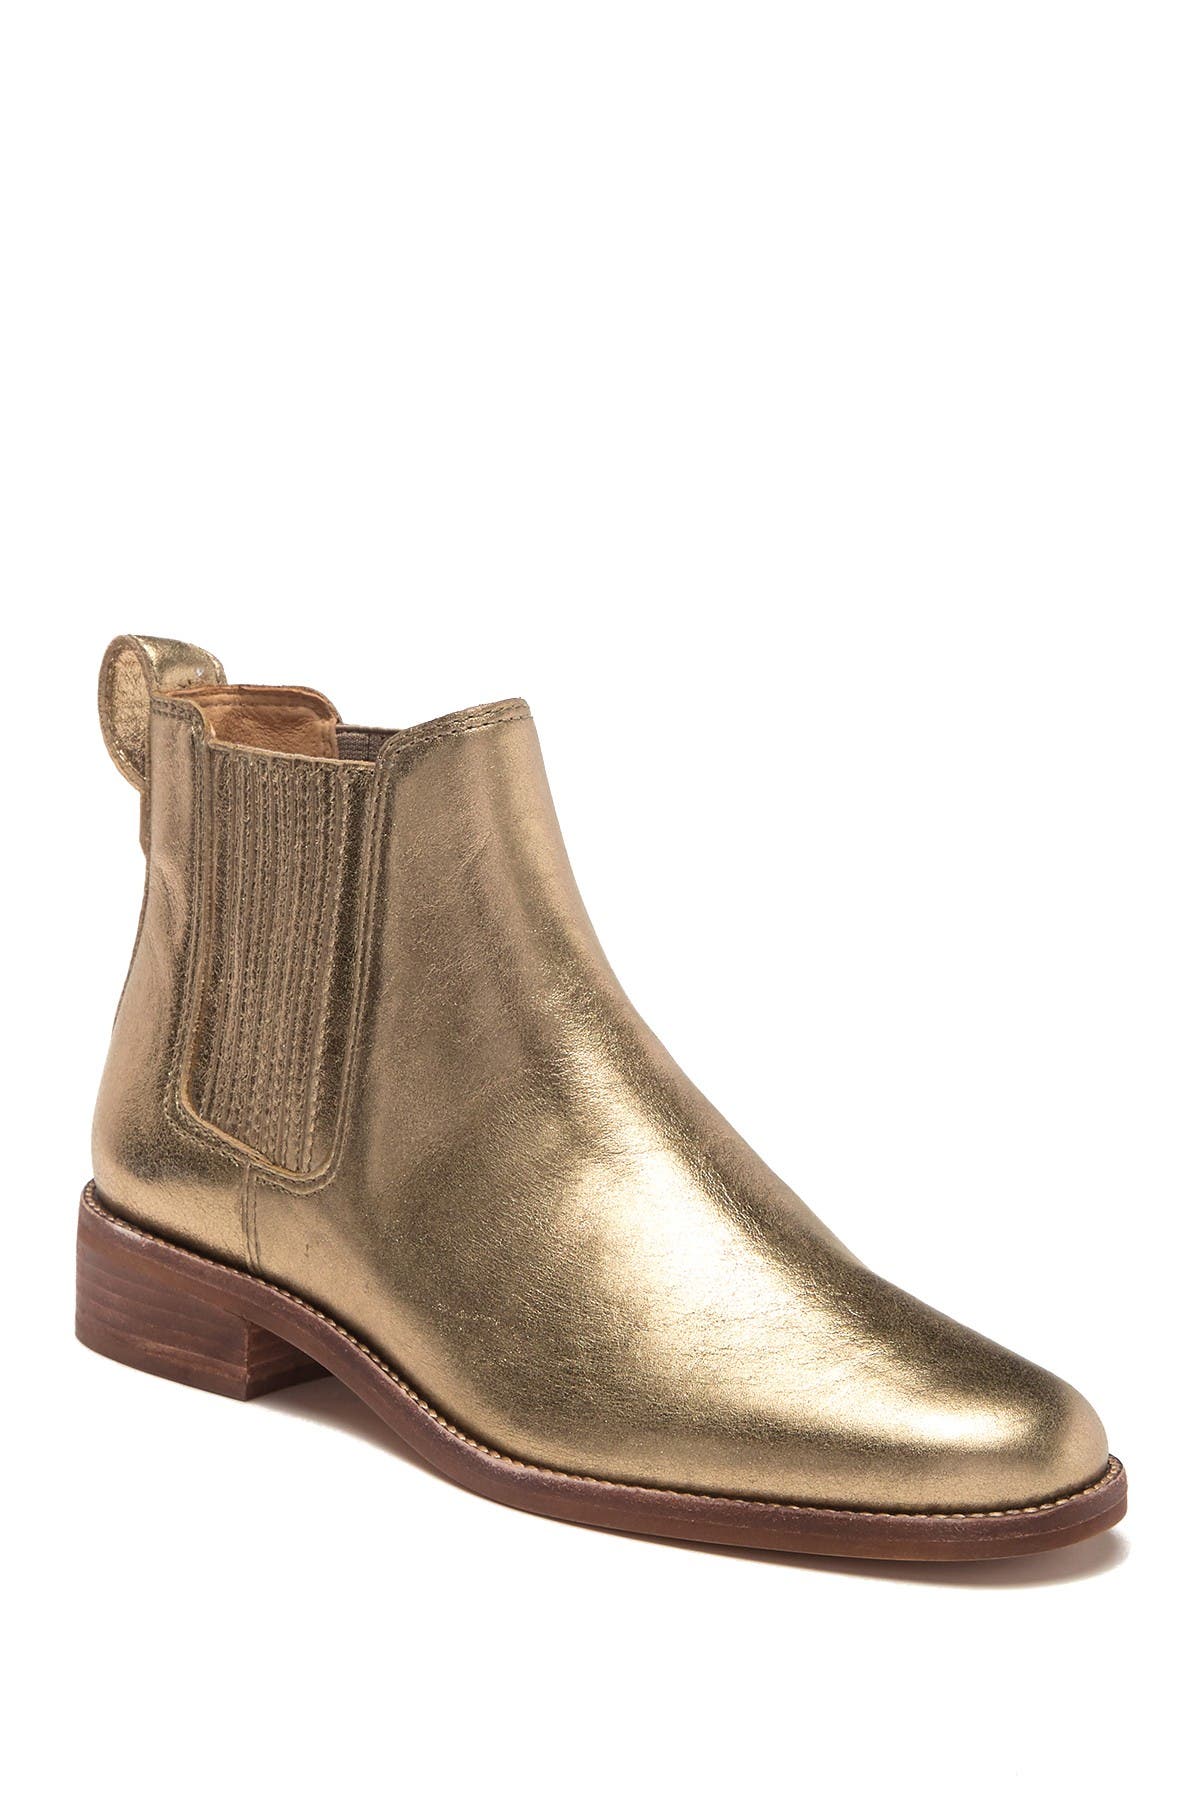 the ainsley chelsea boot madewell